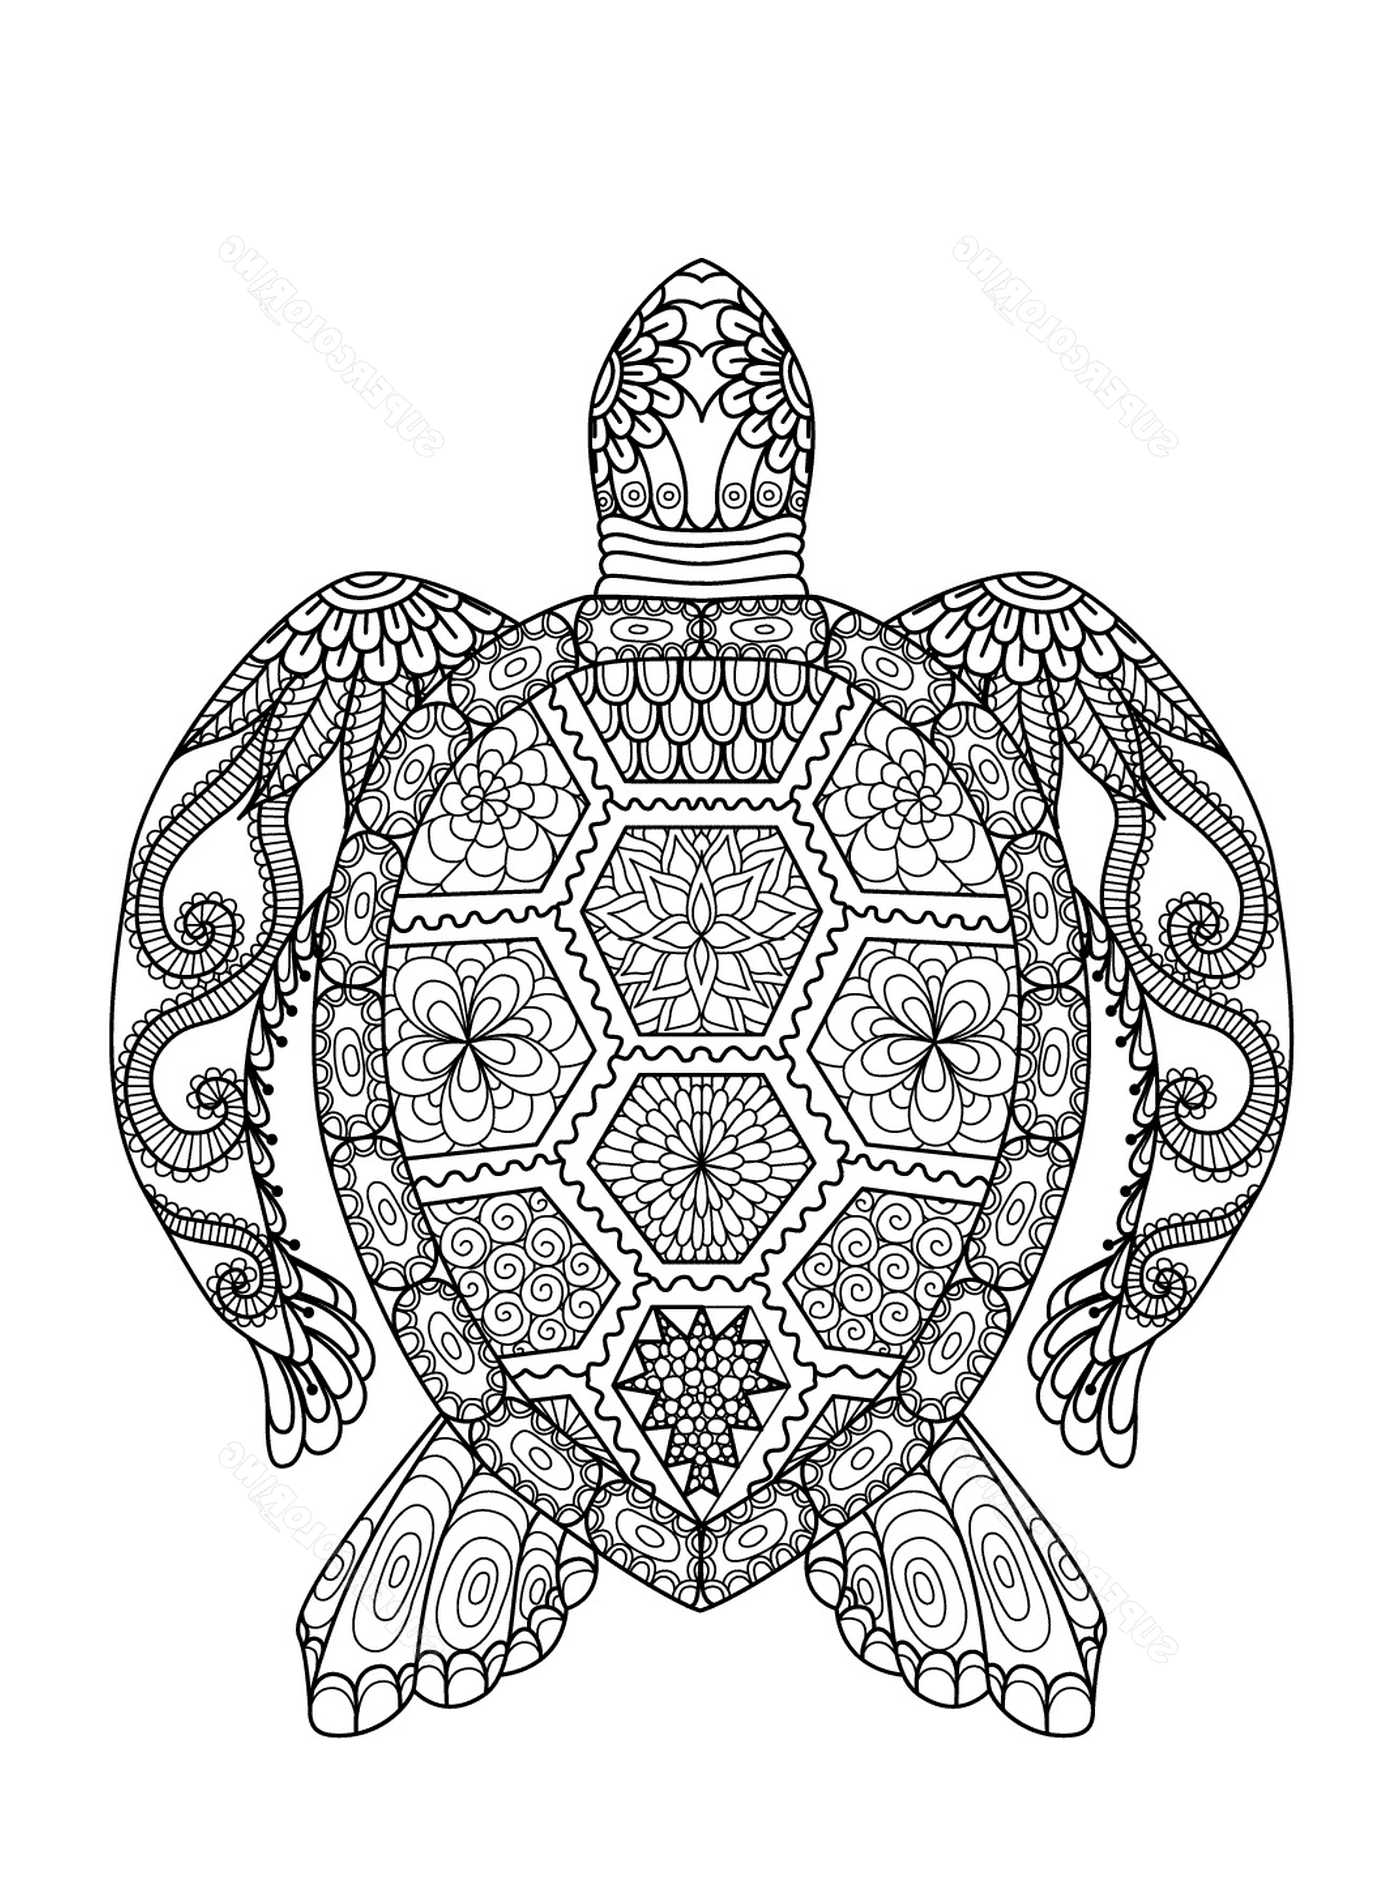  Sea turtle with elaborate patterns 